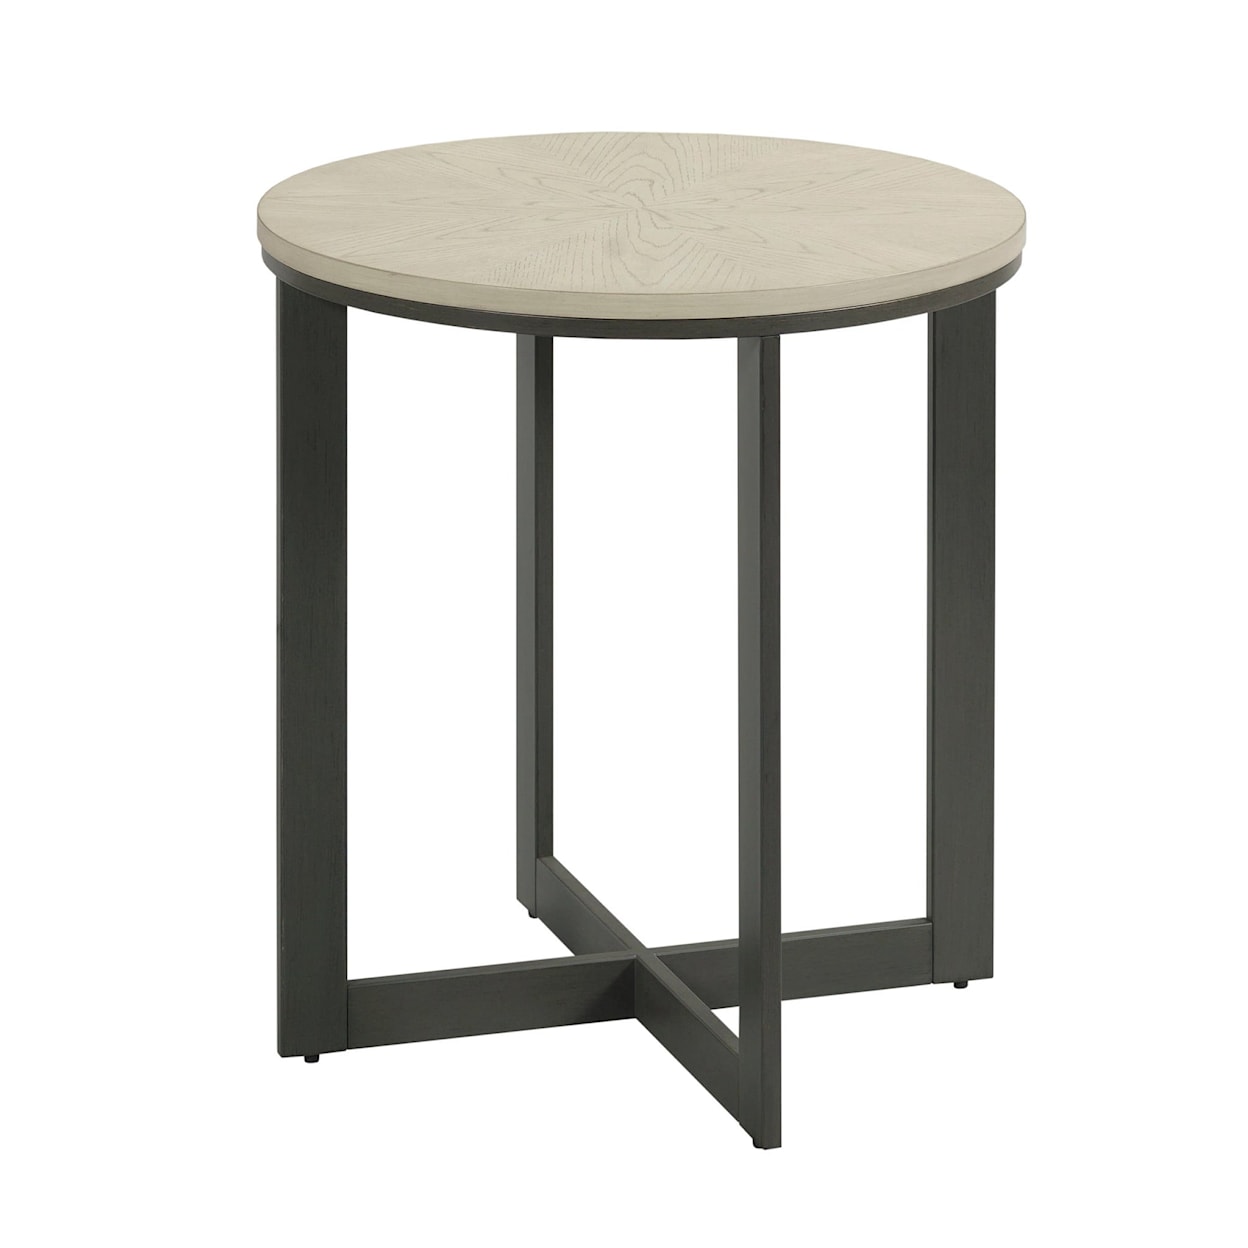 Hammary Portrait Round End Table